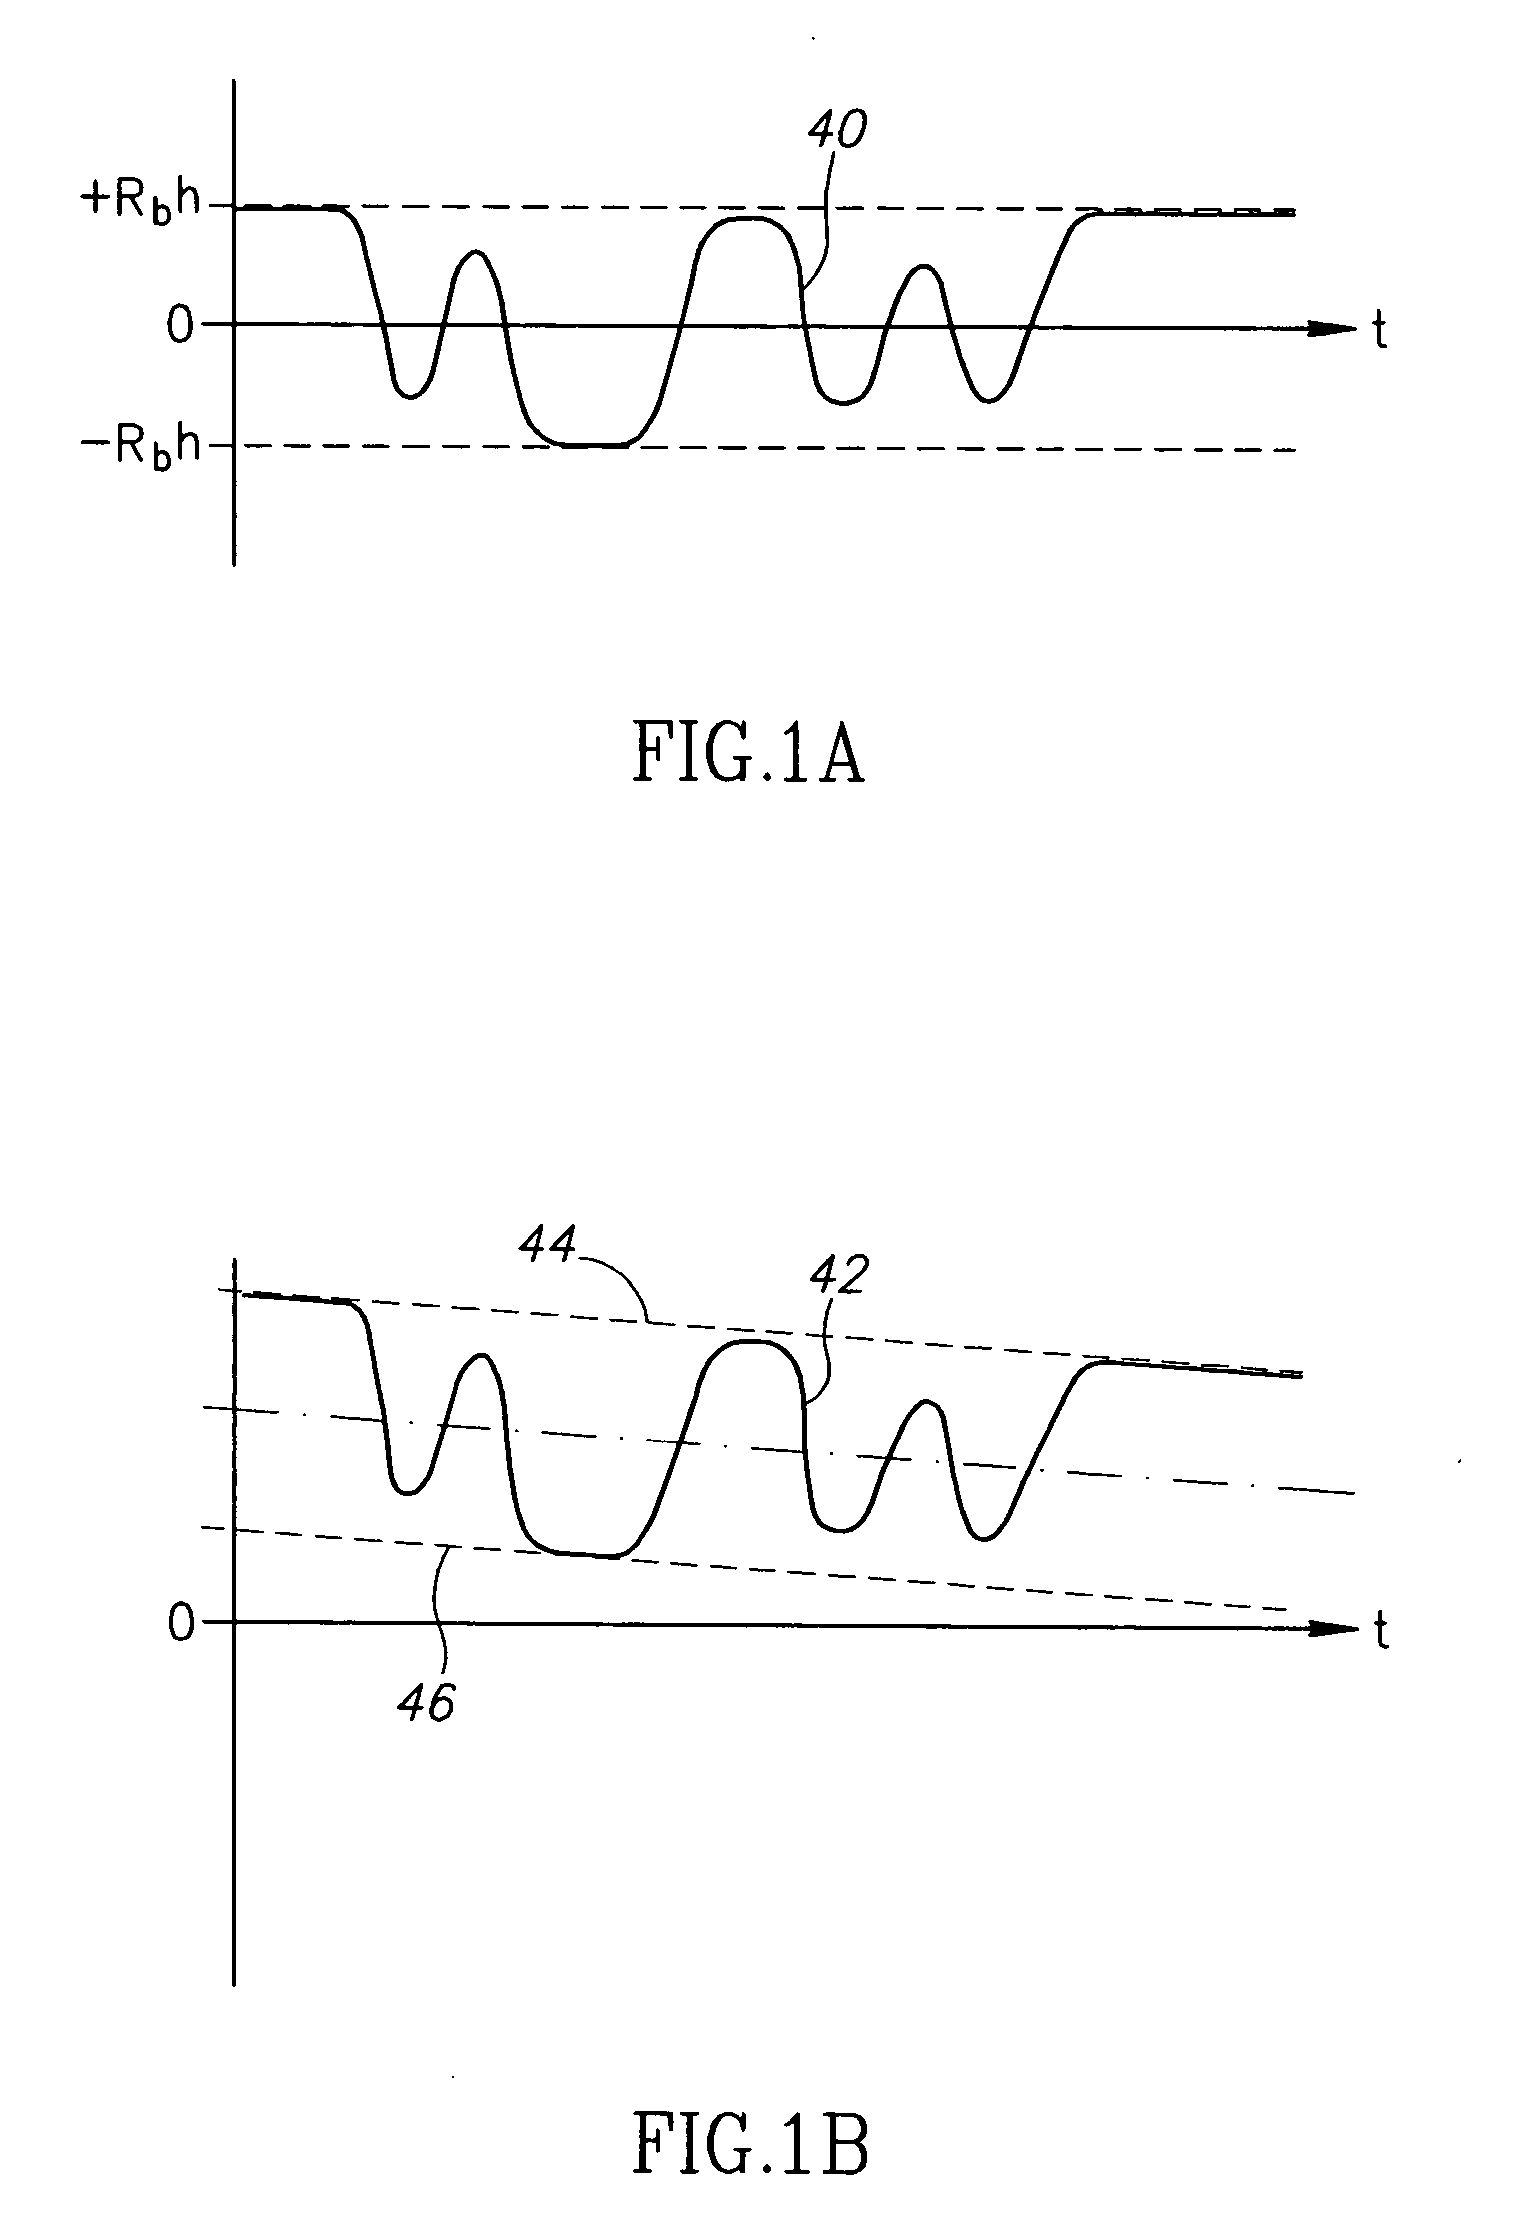 Frequency offset compensation in a digital frequency shift keying receiver